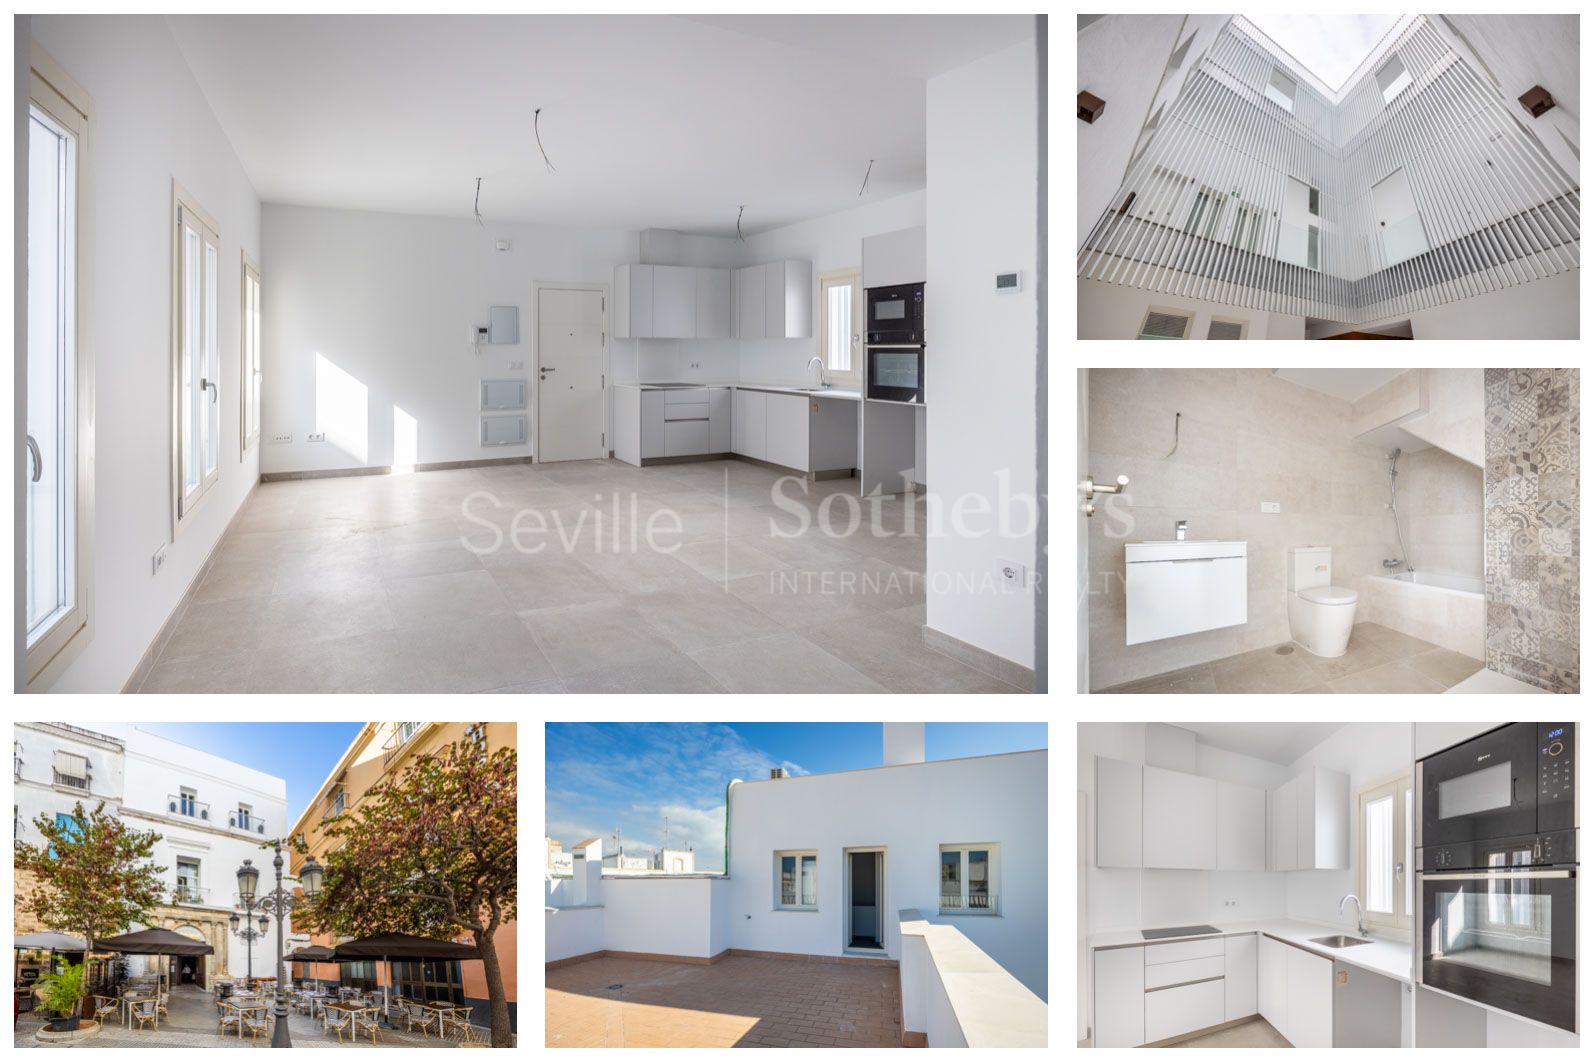 Exclusive property located in an iconic building in the heart of Cadiz.